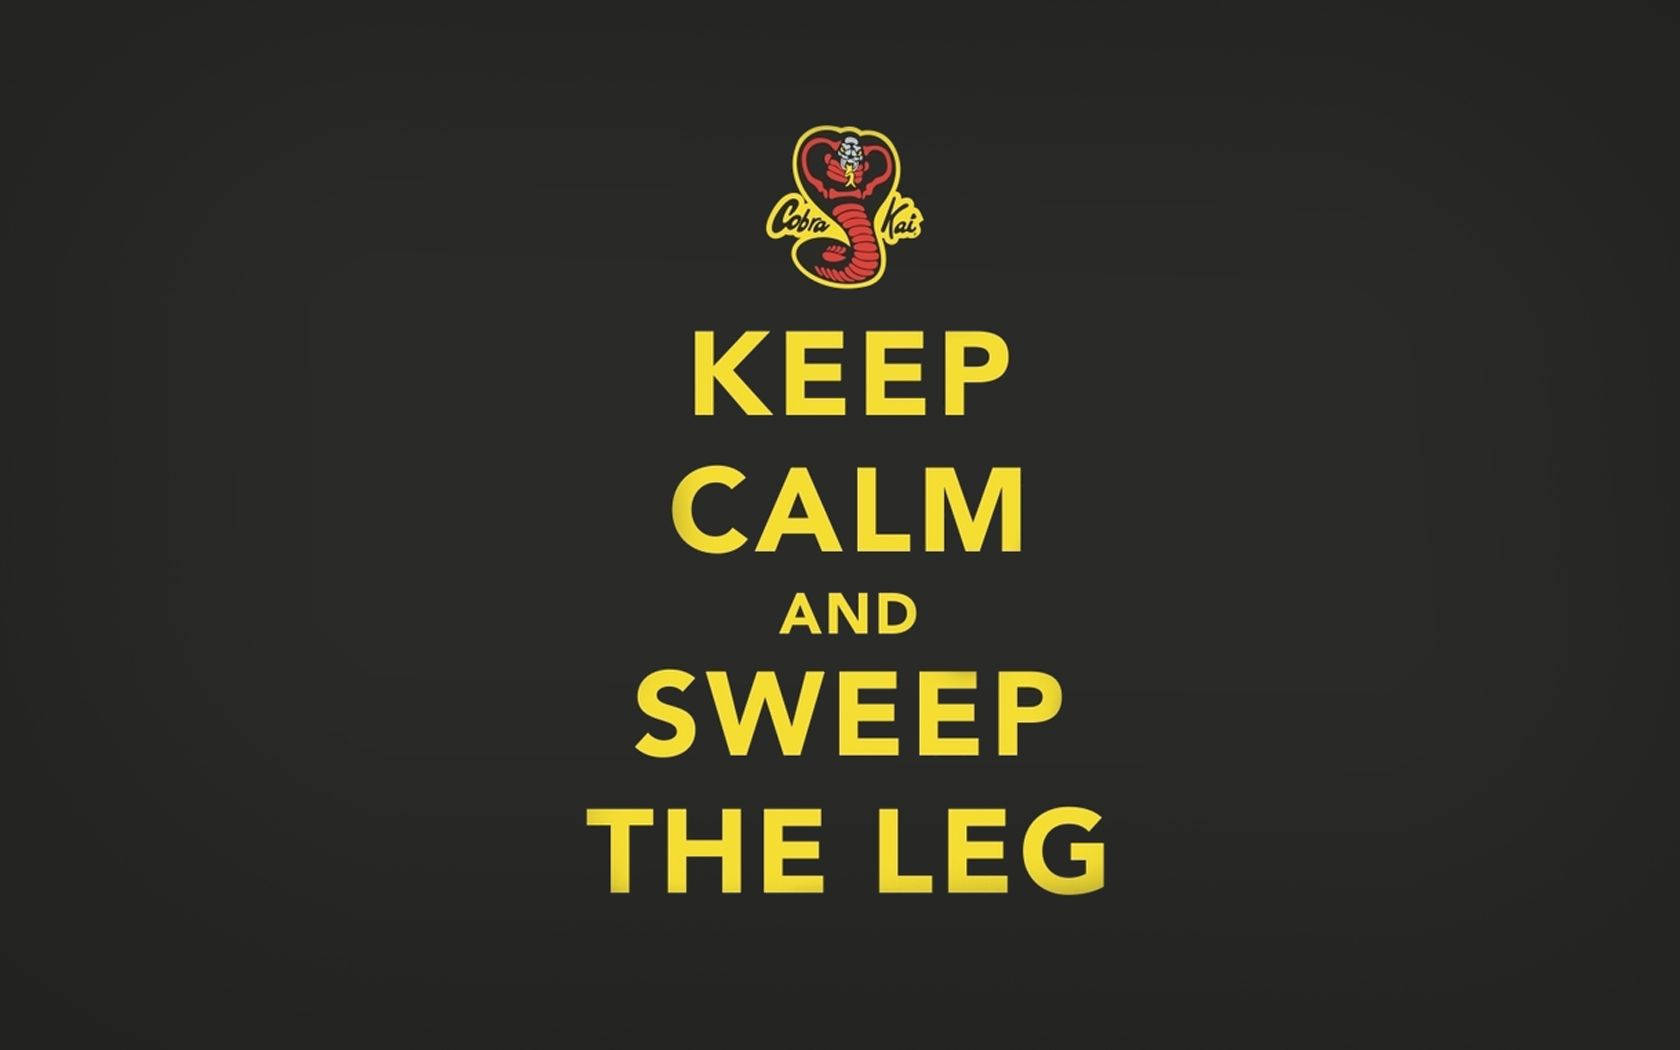 "Sweep the leg!" - Johnny Lawrence Wallpaper